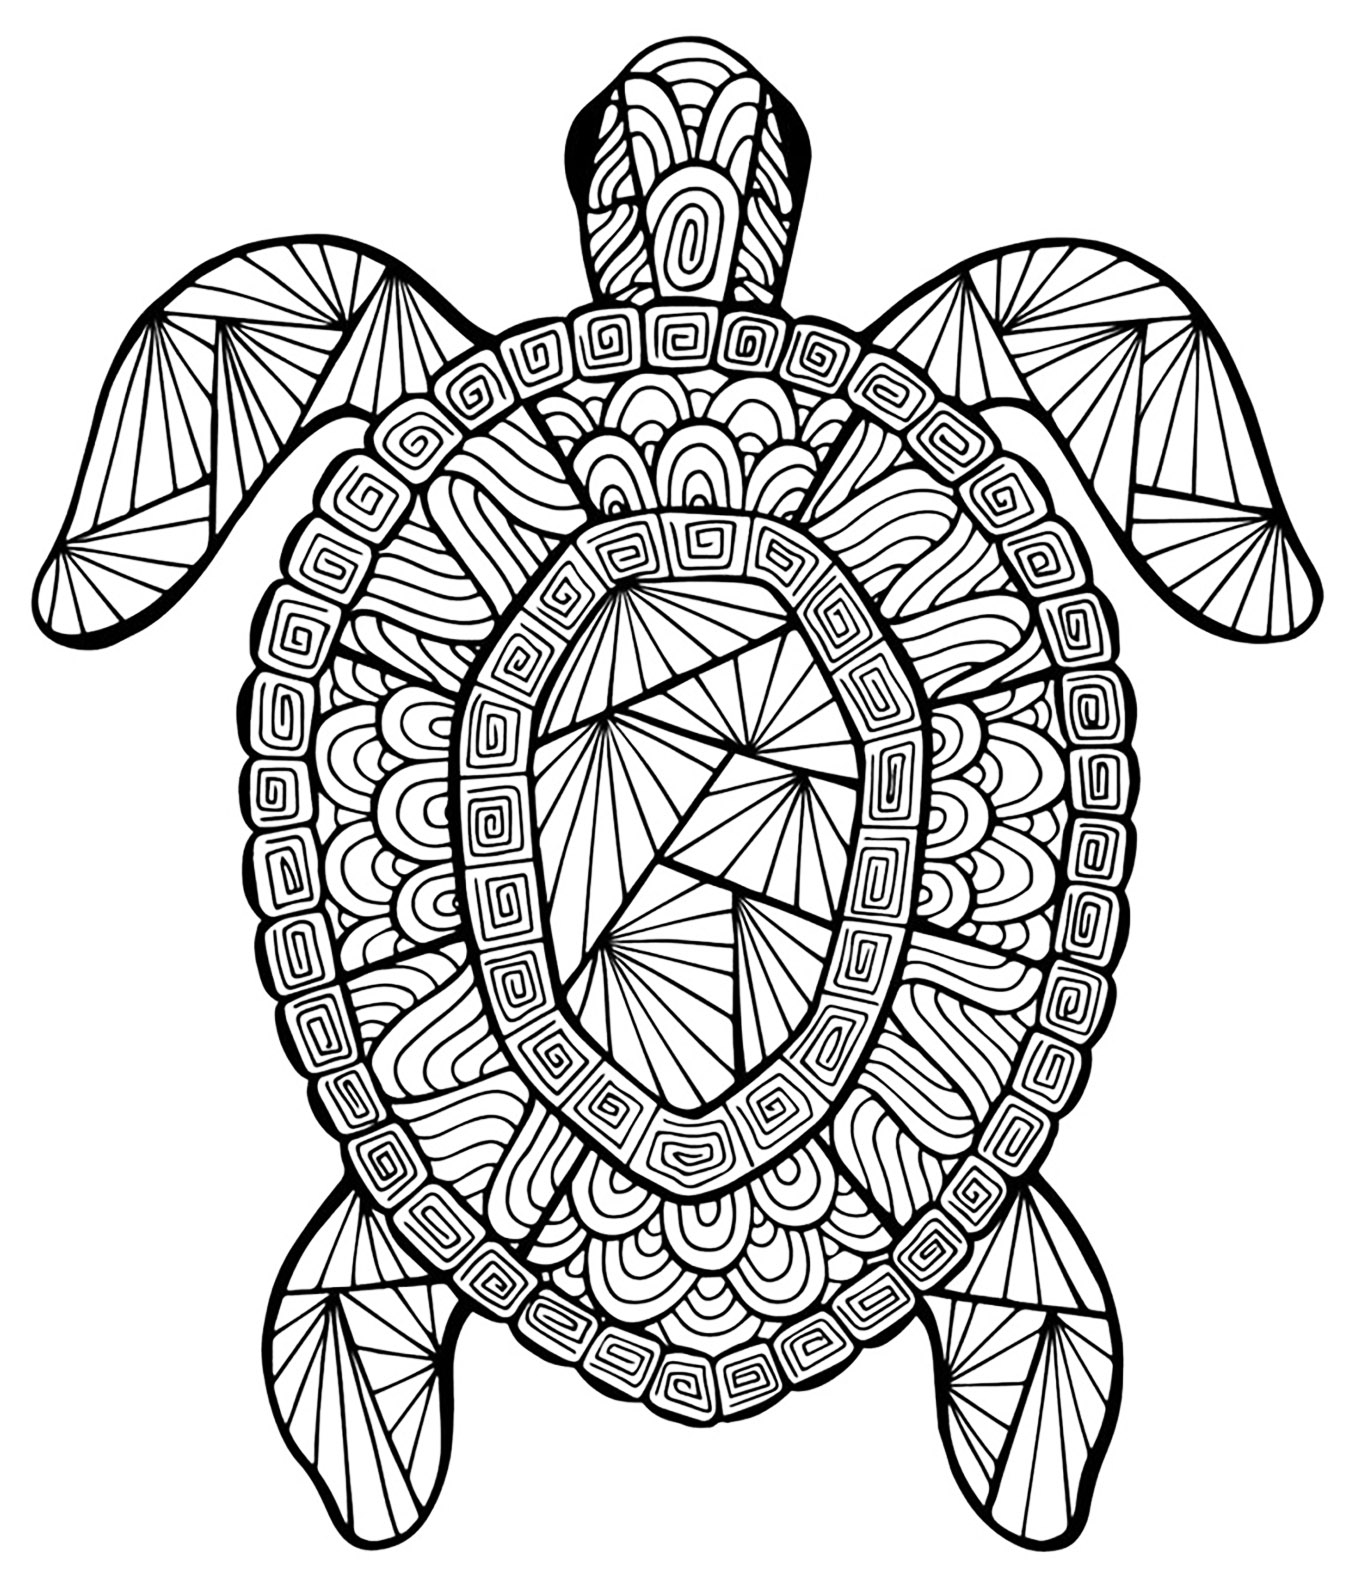 Download Incredible turtle - Turtles Adult Coloring Pages